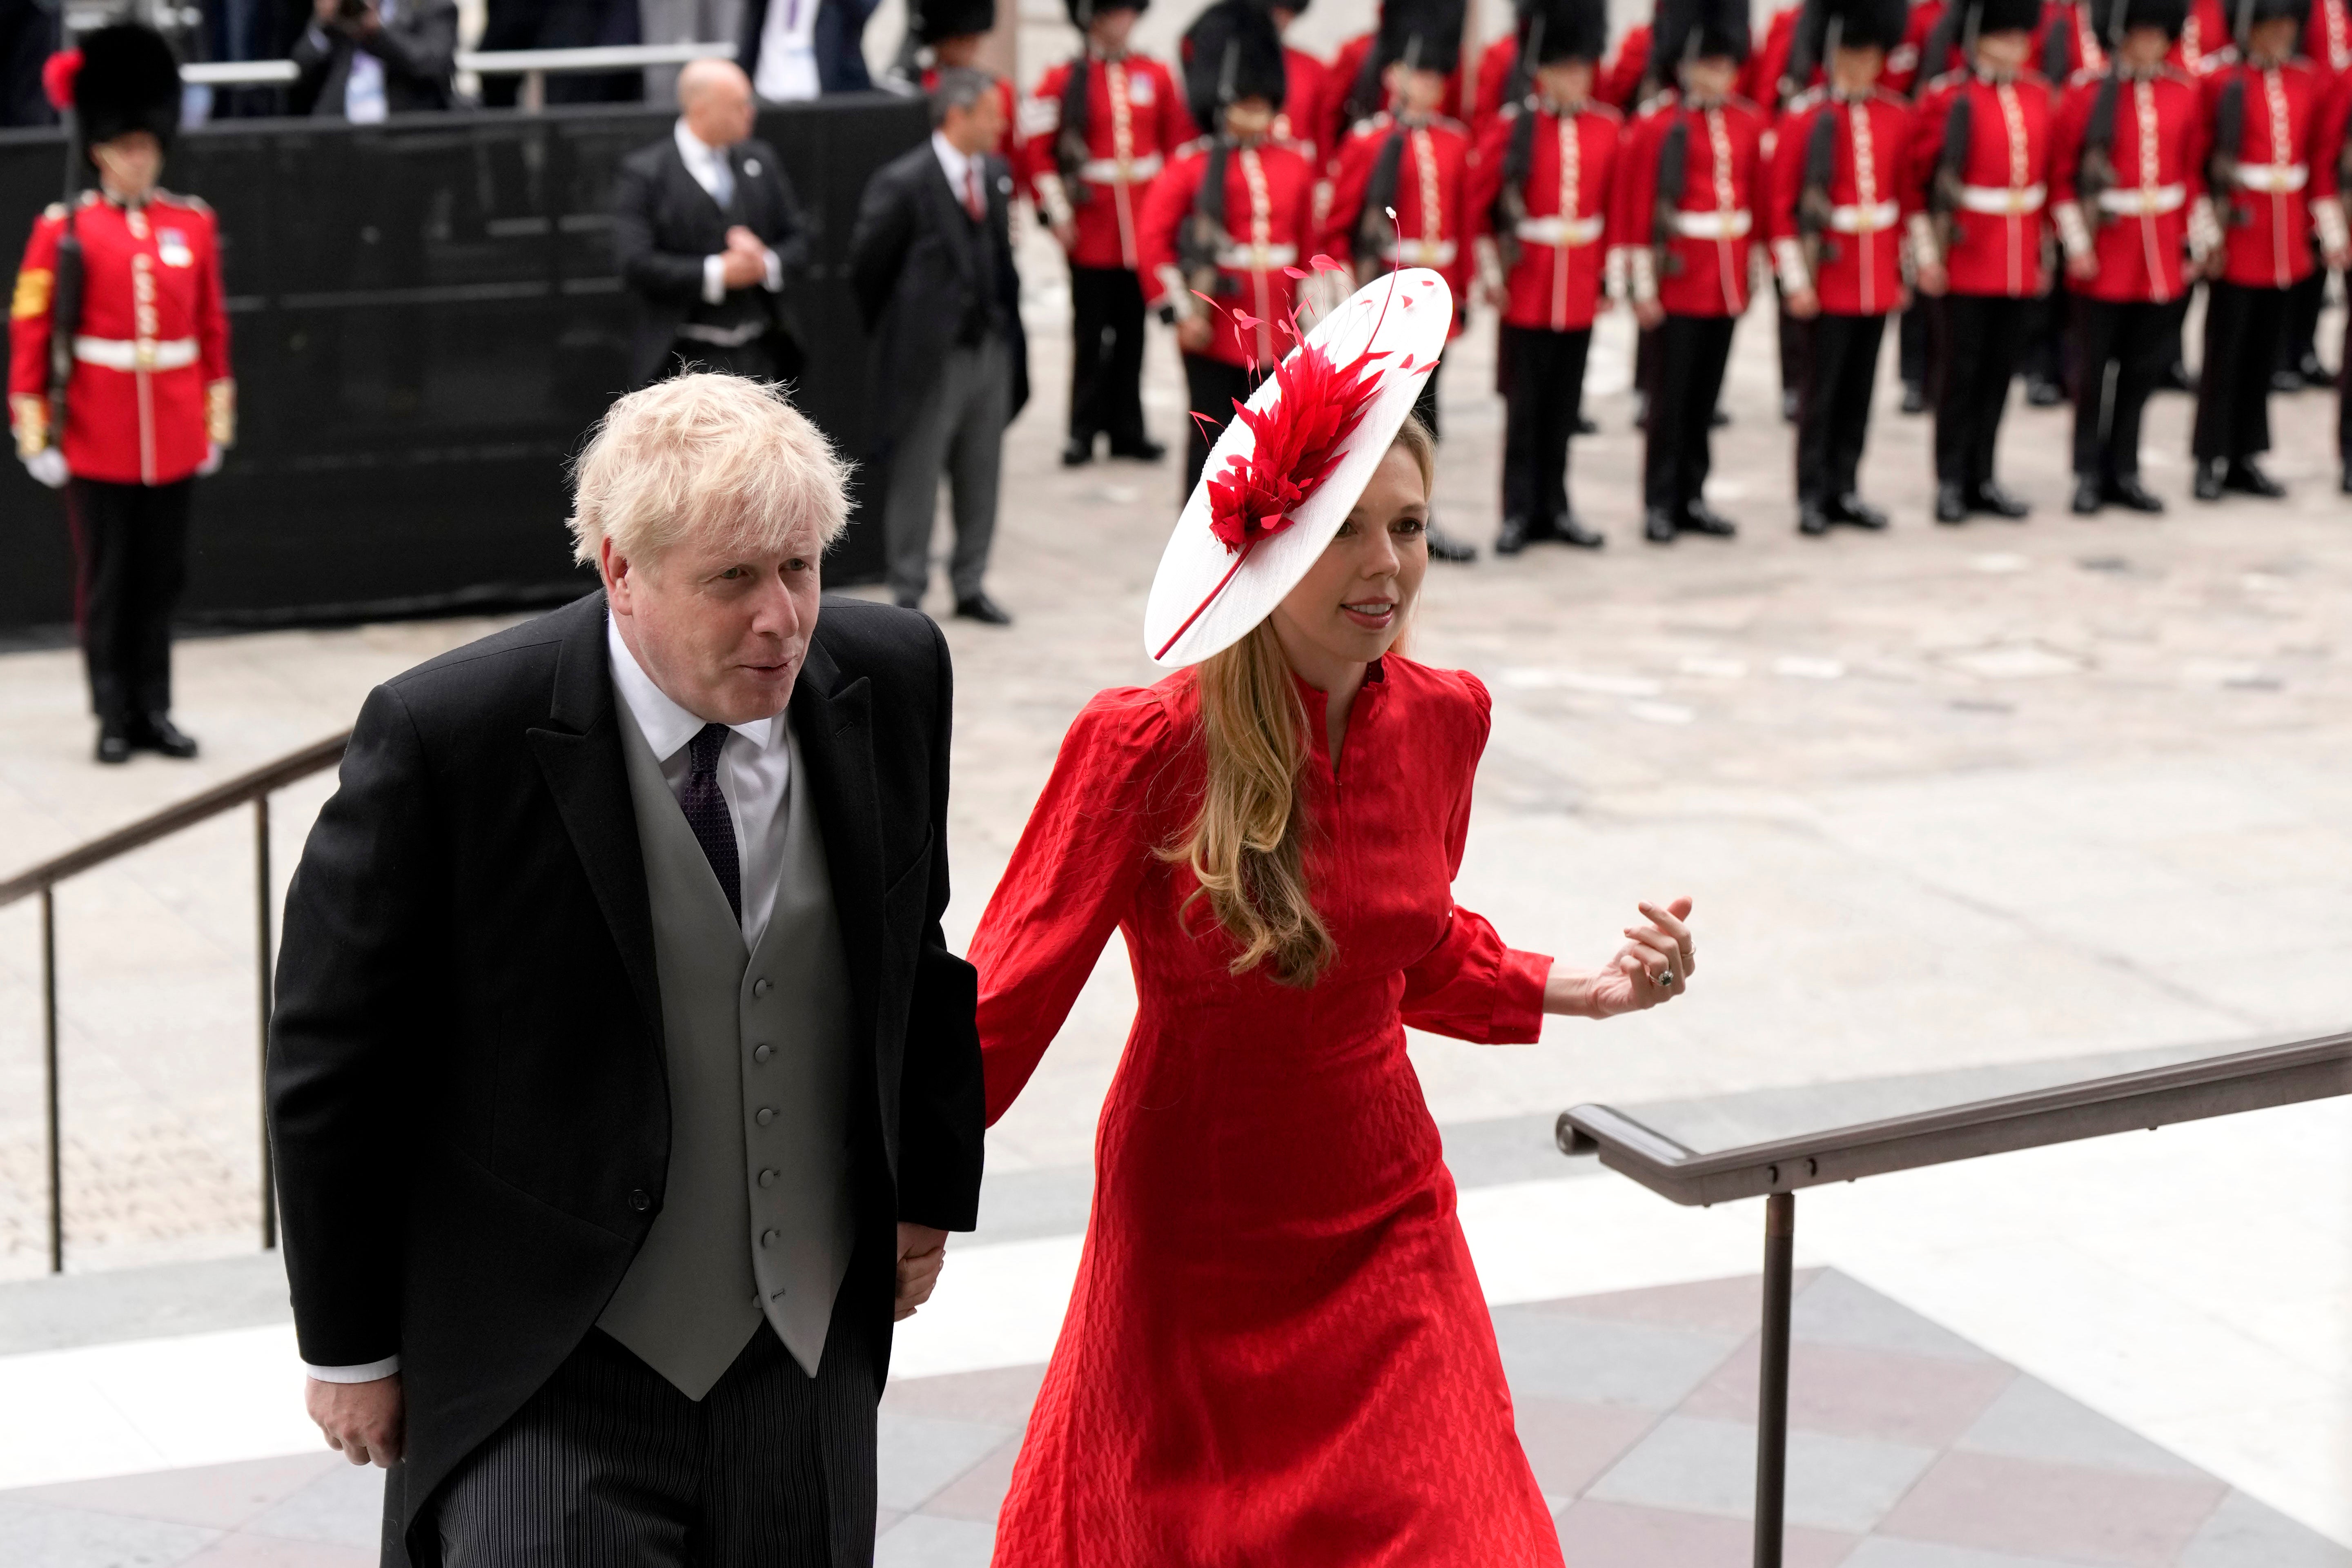 Johnson and wife Carrie arrive to St Paul’s